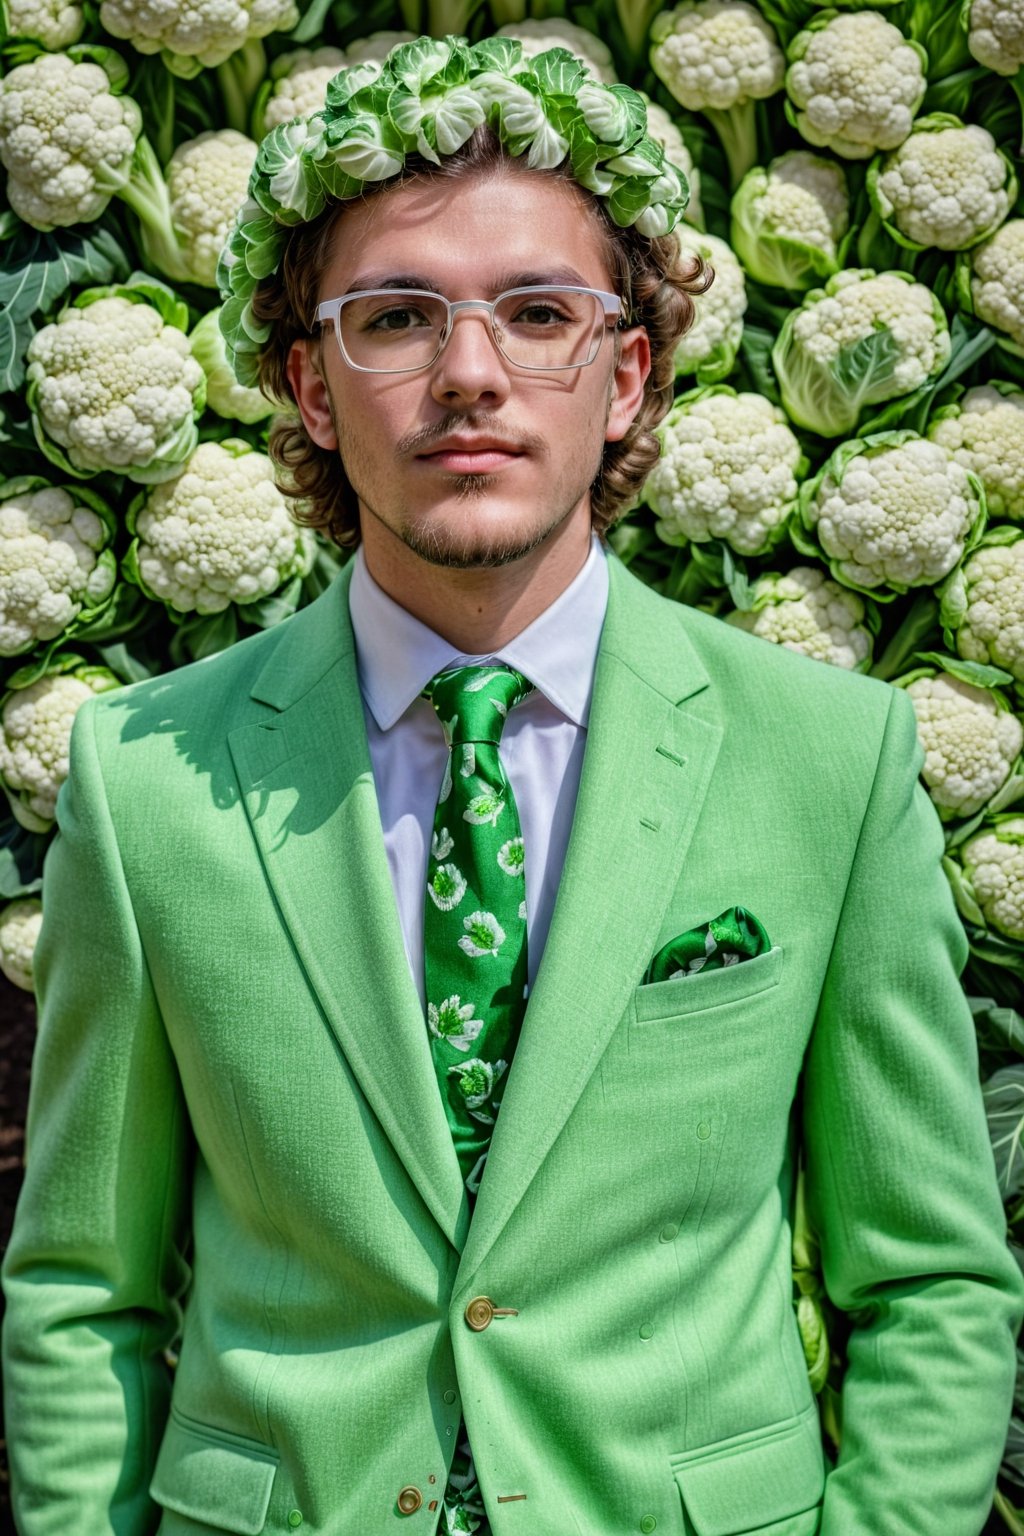 ((best quality)), ((upperbody shot)), ((masterpiece)), ((detailed)), ((4K)), modern portrait man 23 years old with a masculine face and glasses, dressed in an outfit entirely made of cauliflower. His appearance is unique: the suit, meticulously assembled from the white and green florets of cauliflower, includes a jacket, trousersї, green and white colors,Enhanced Reality